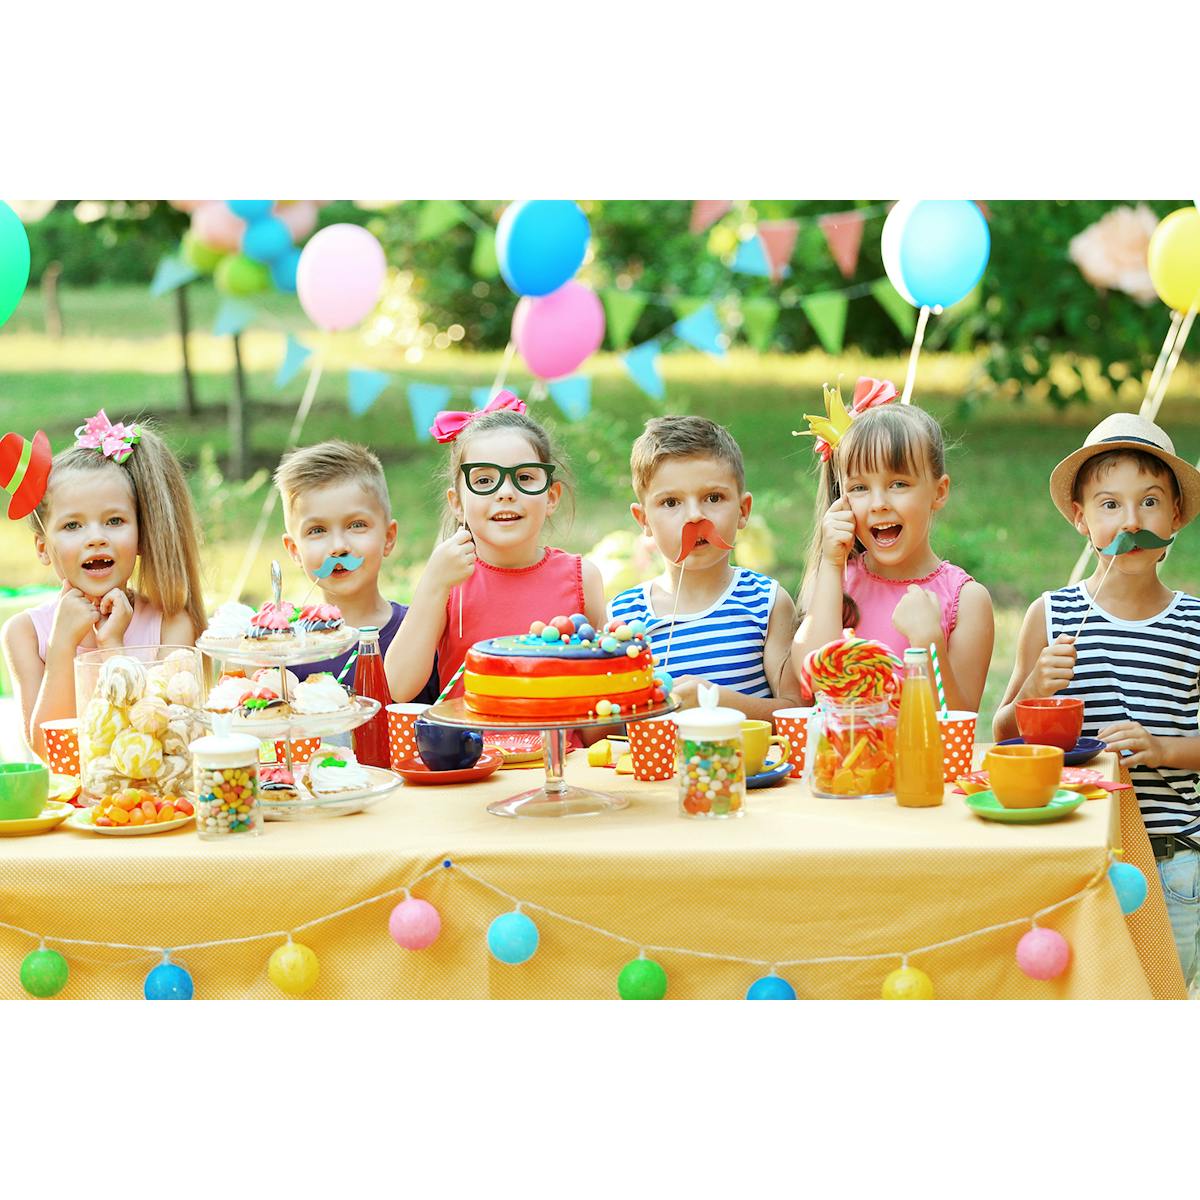 The Best Party Games For 6 Year Olds